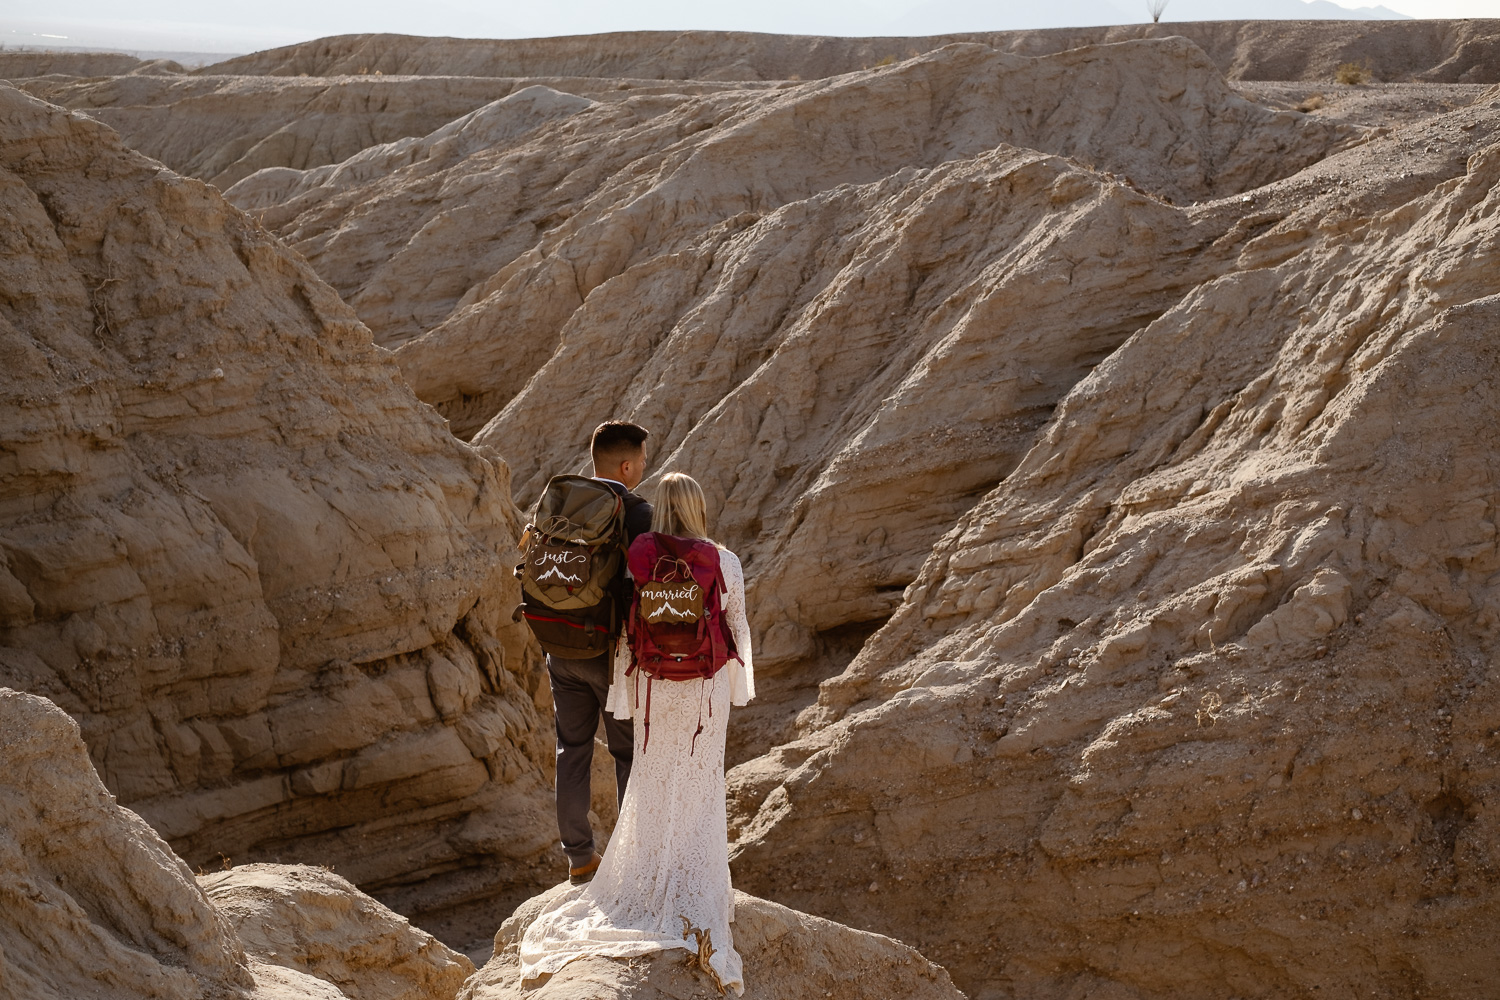 Couple standing with backpacks and wedding attire overlooking canyon.